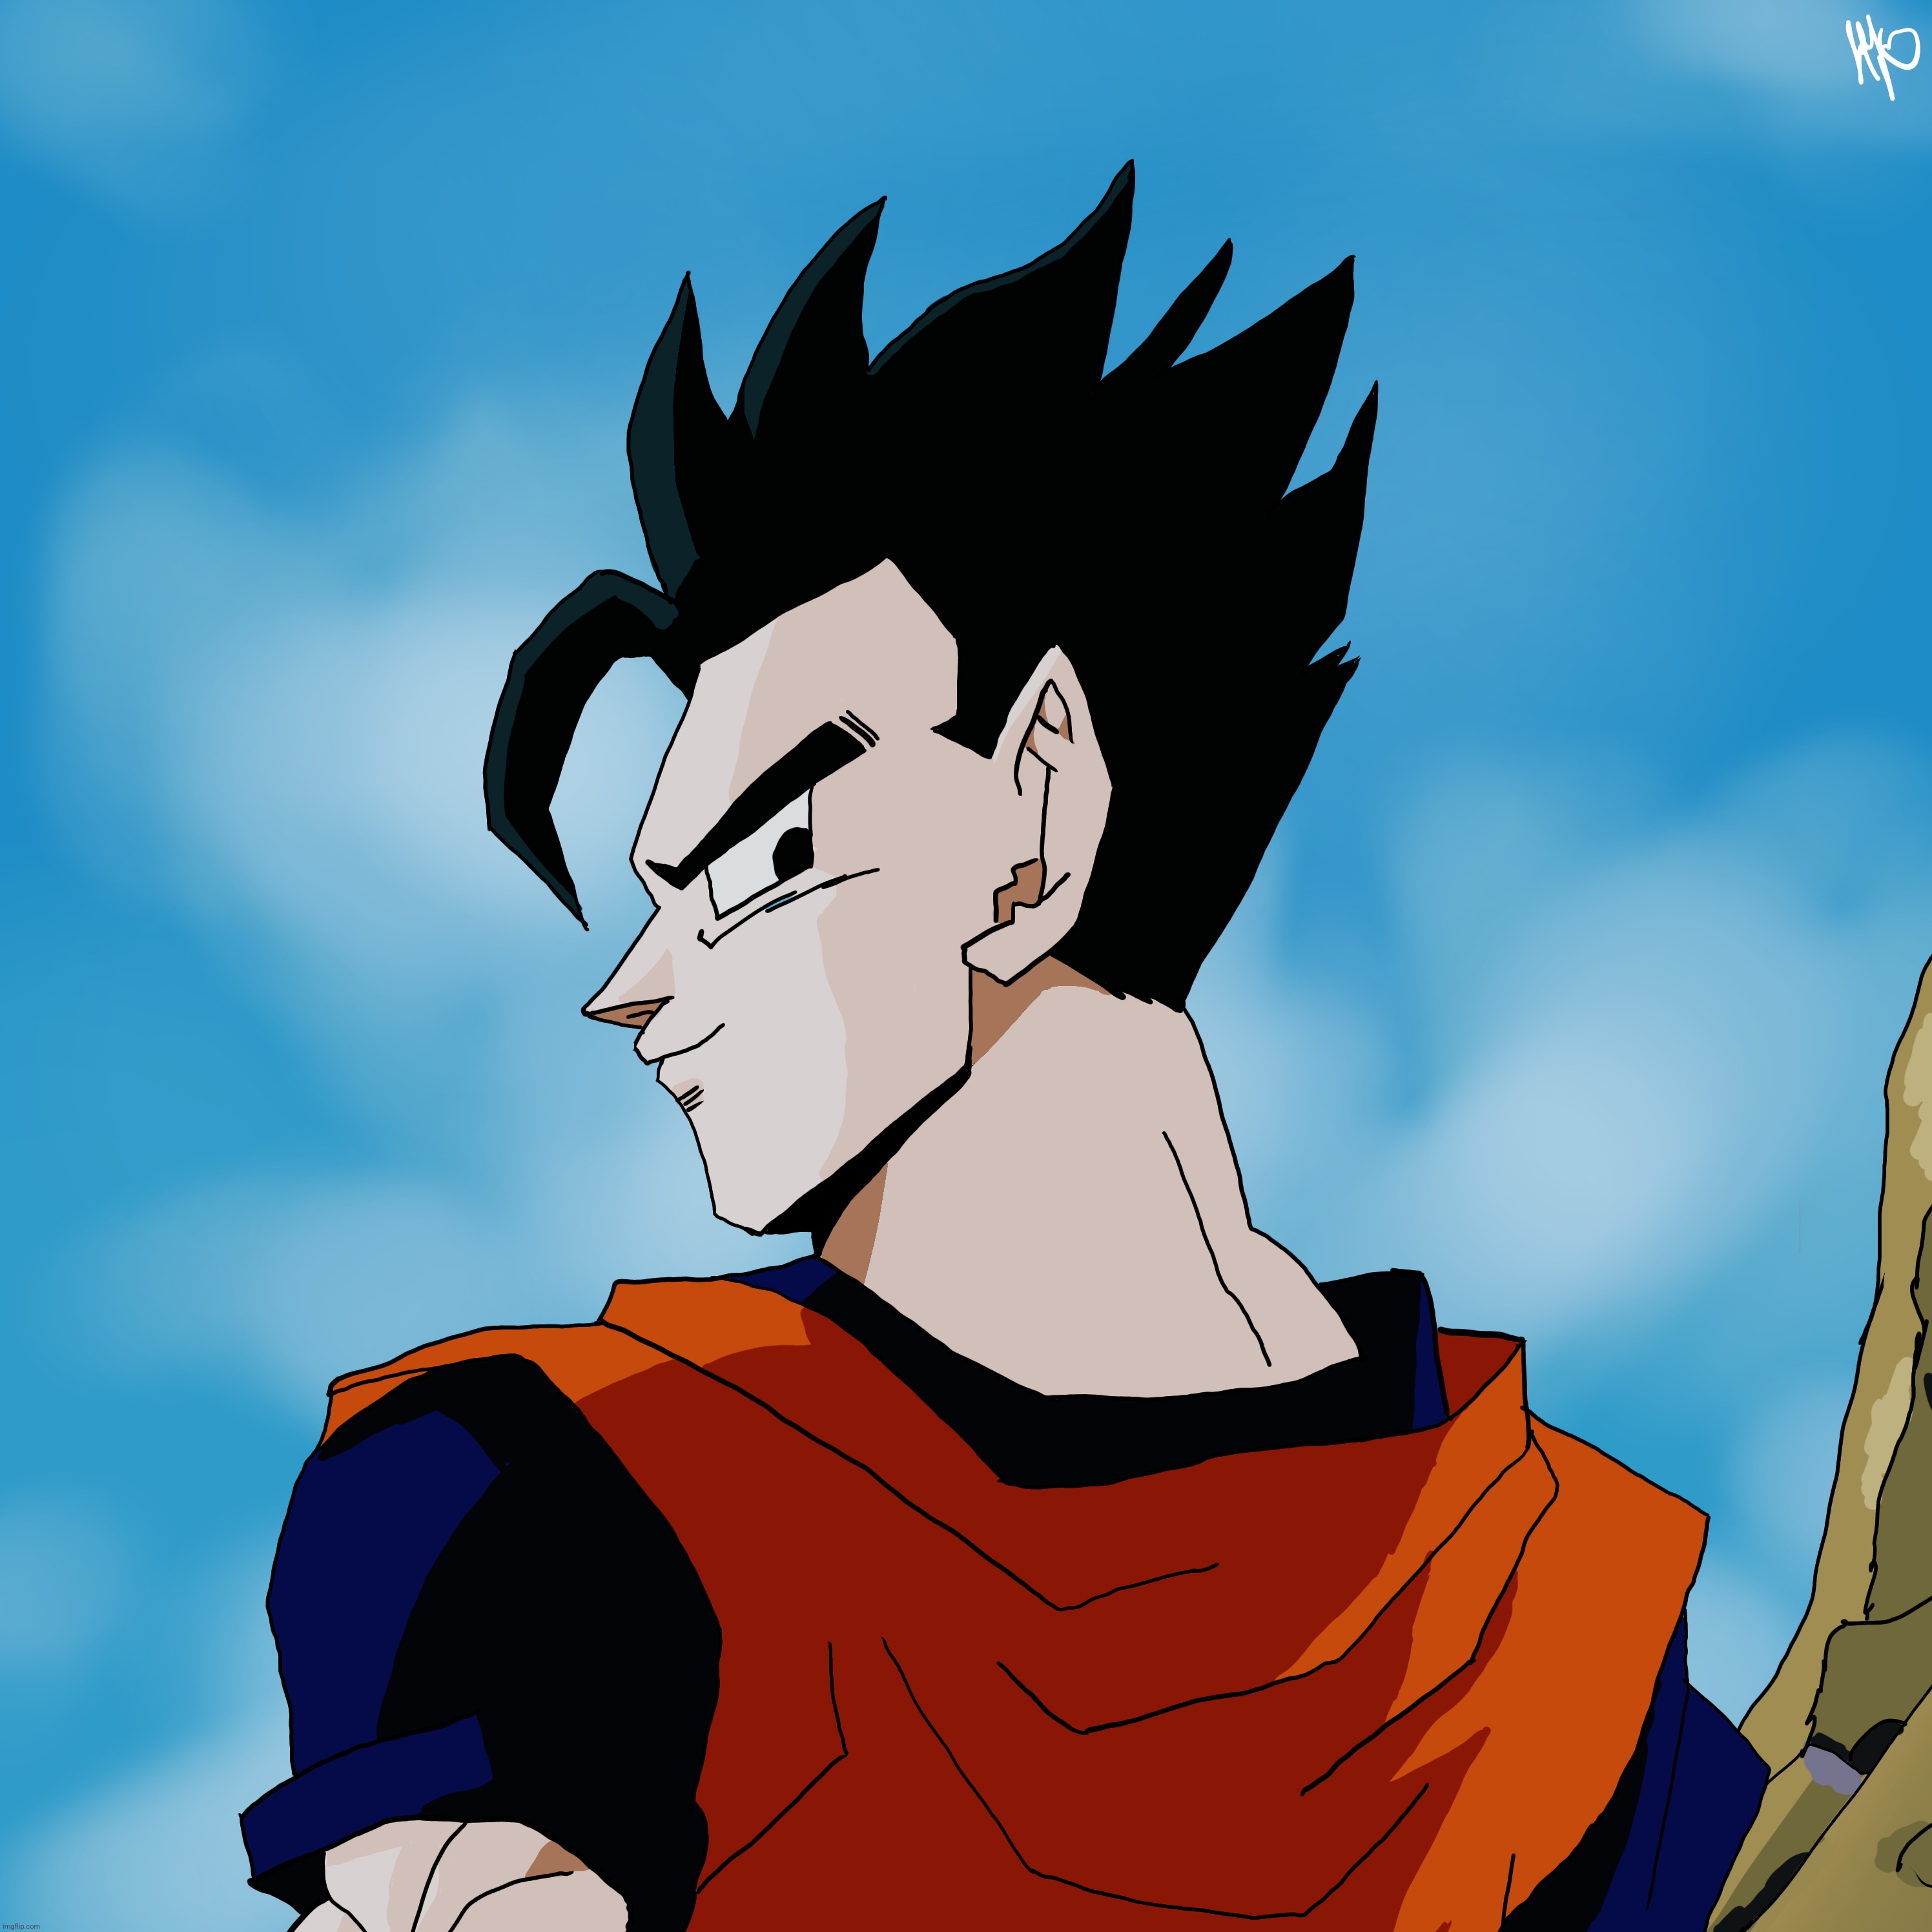 Ultimate Gohan | image tagged in dbz,dragon ball z,gohan | made w/ Imgflip meme maker